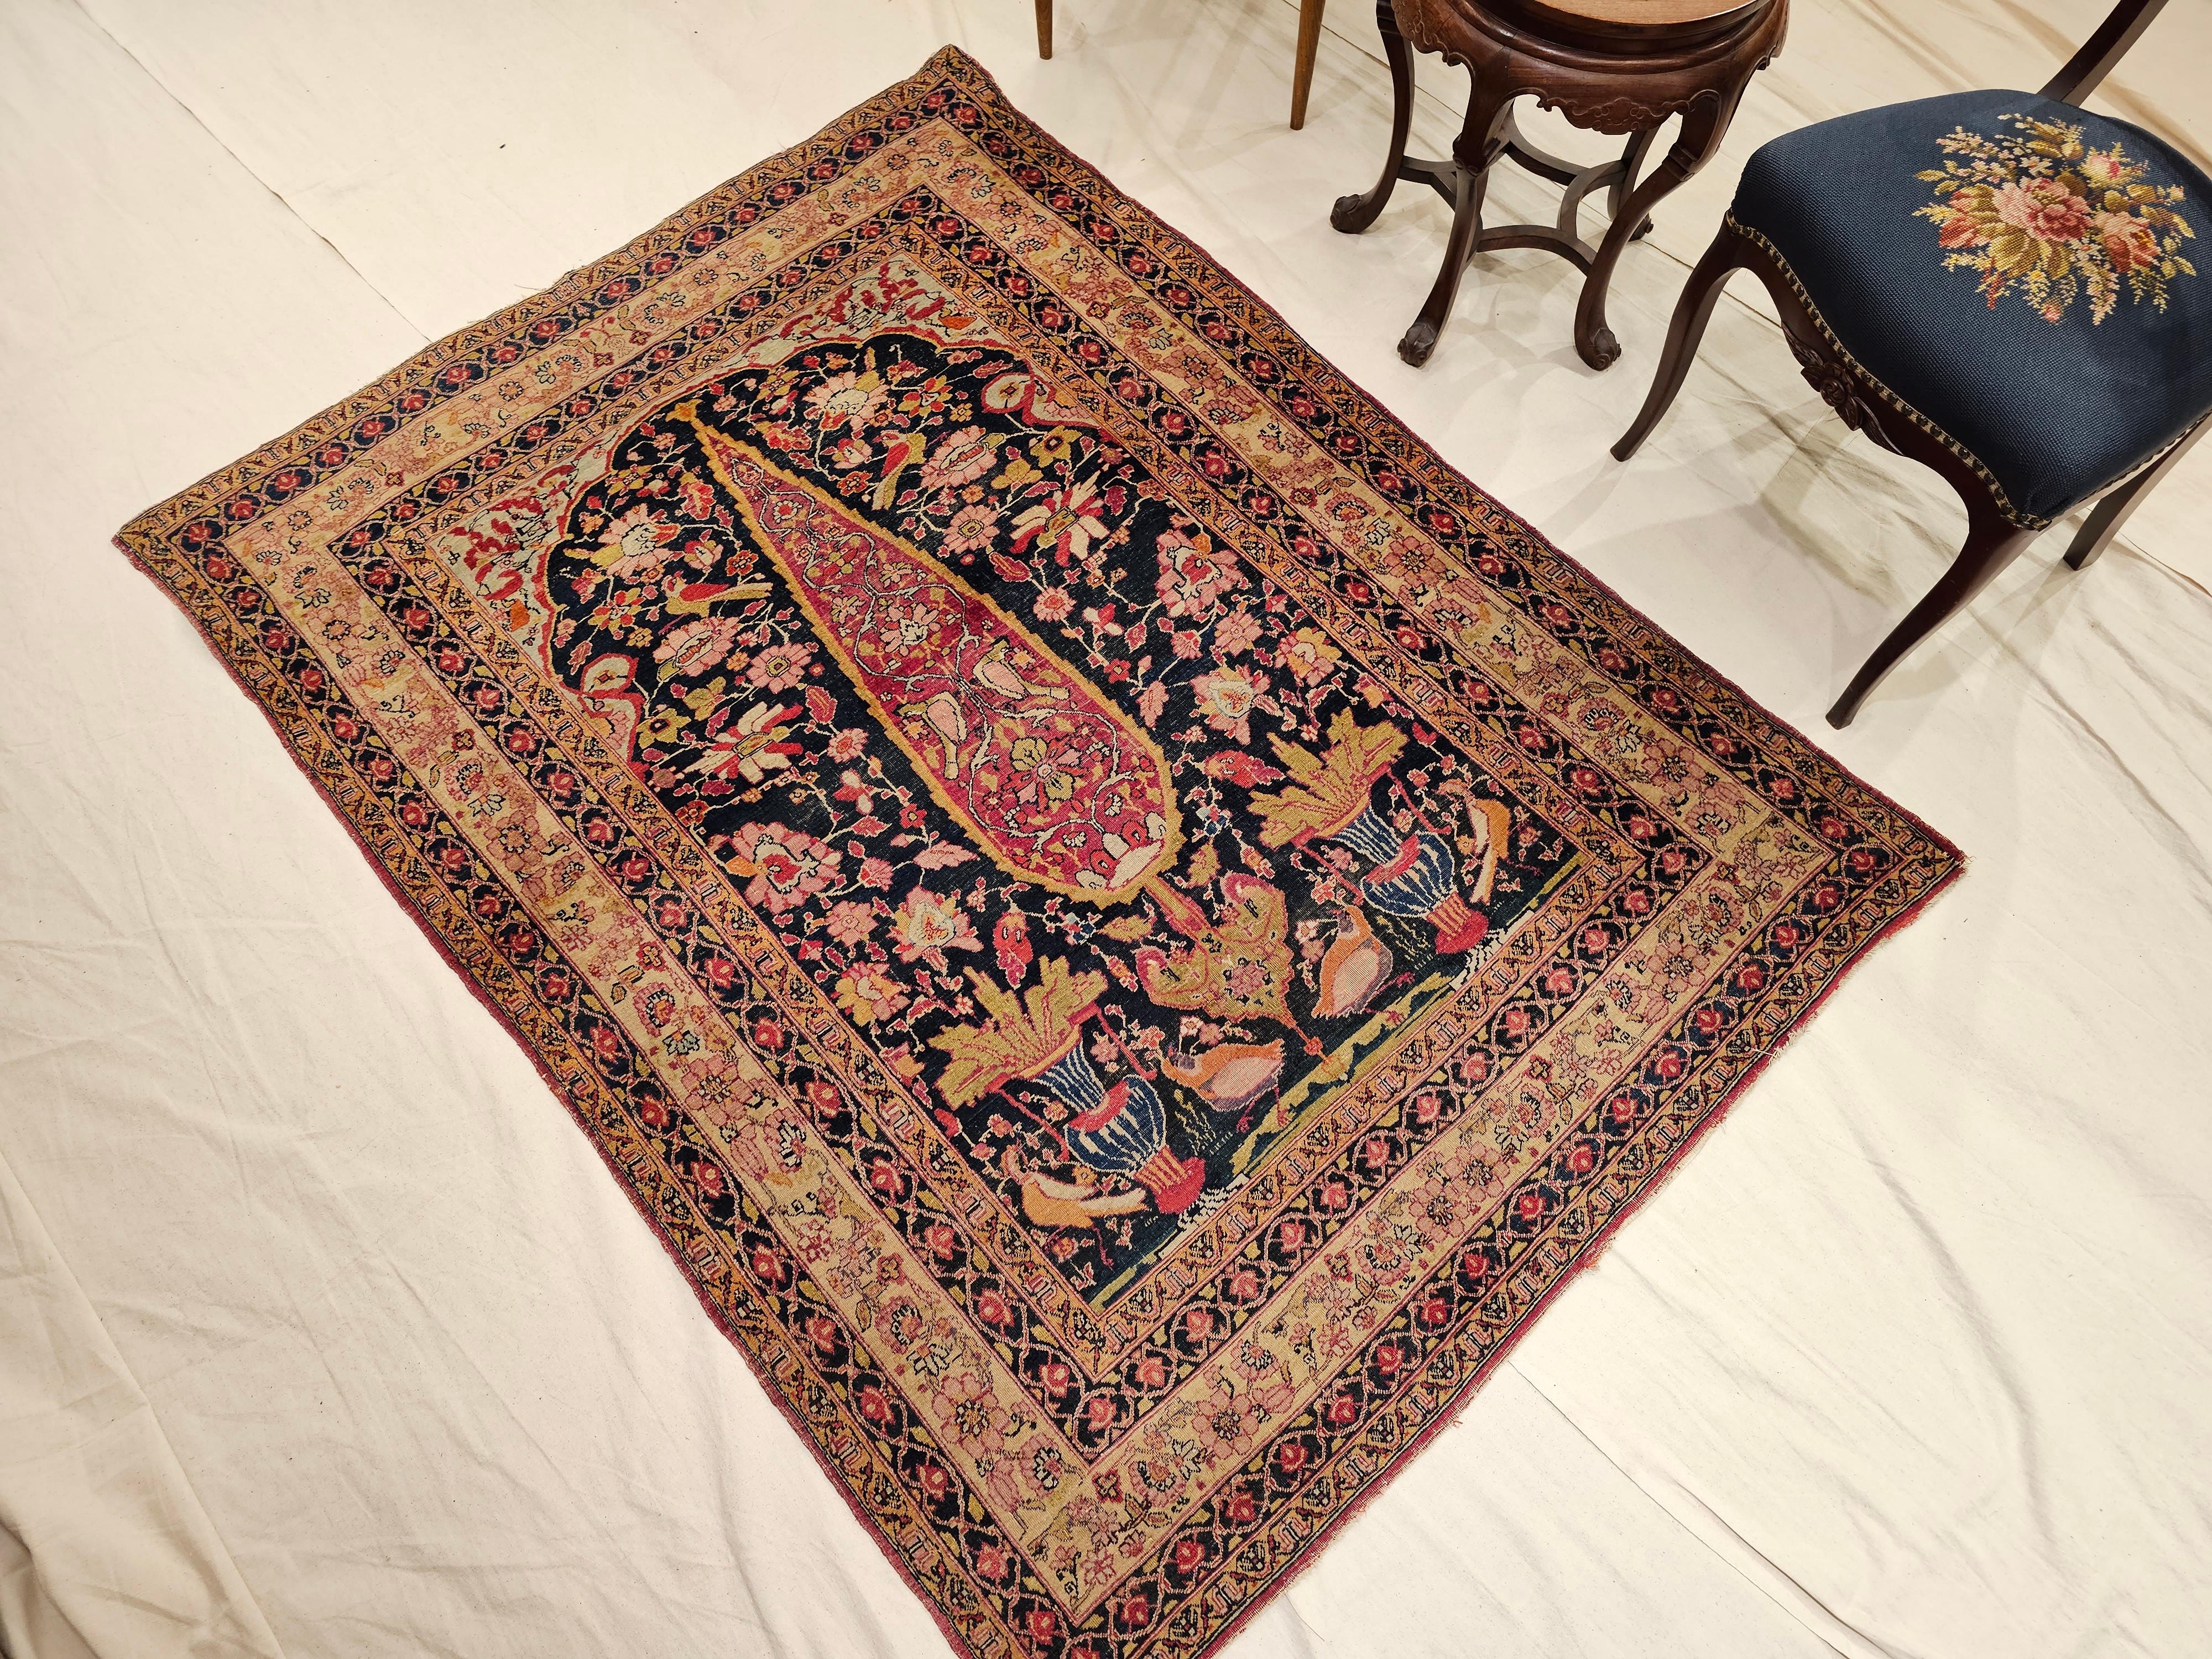 19th Century Persian Kerman Lavar Area Rug in the “Tree of Life” Pattern For Sale 7